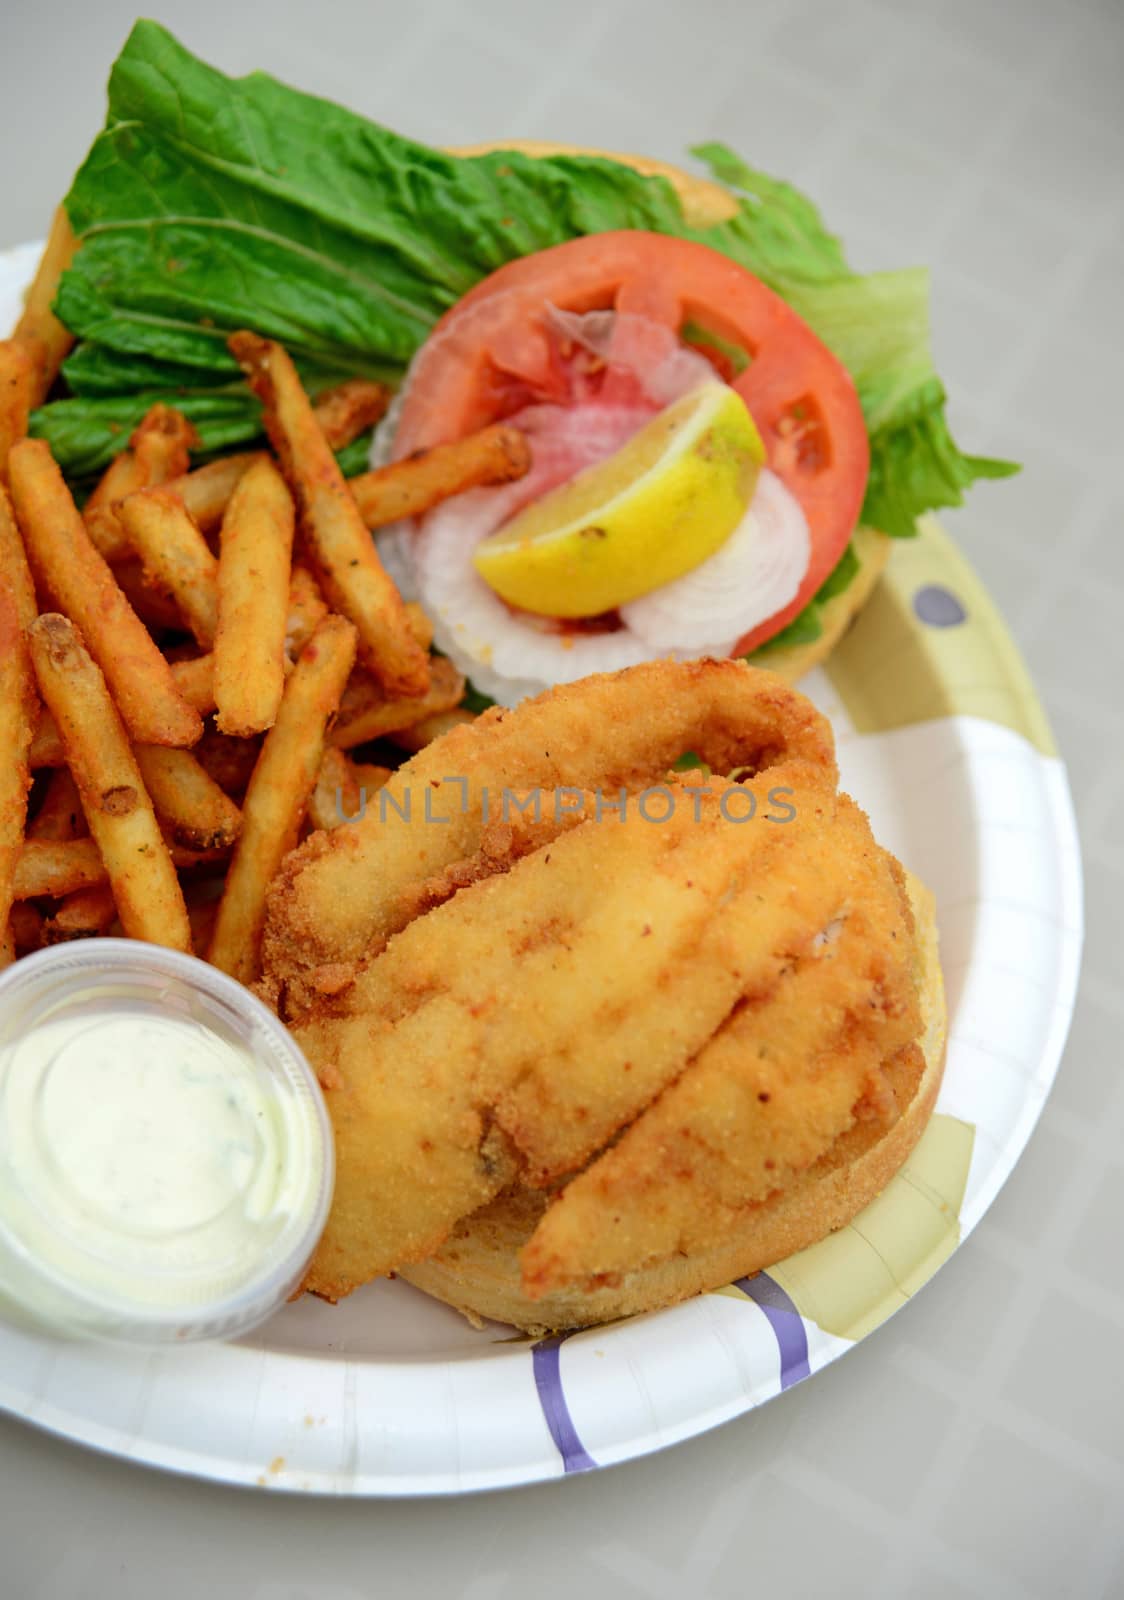 fried fish sandwich and french fries on a plate